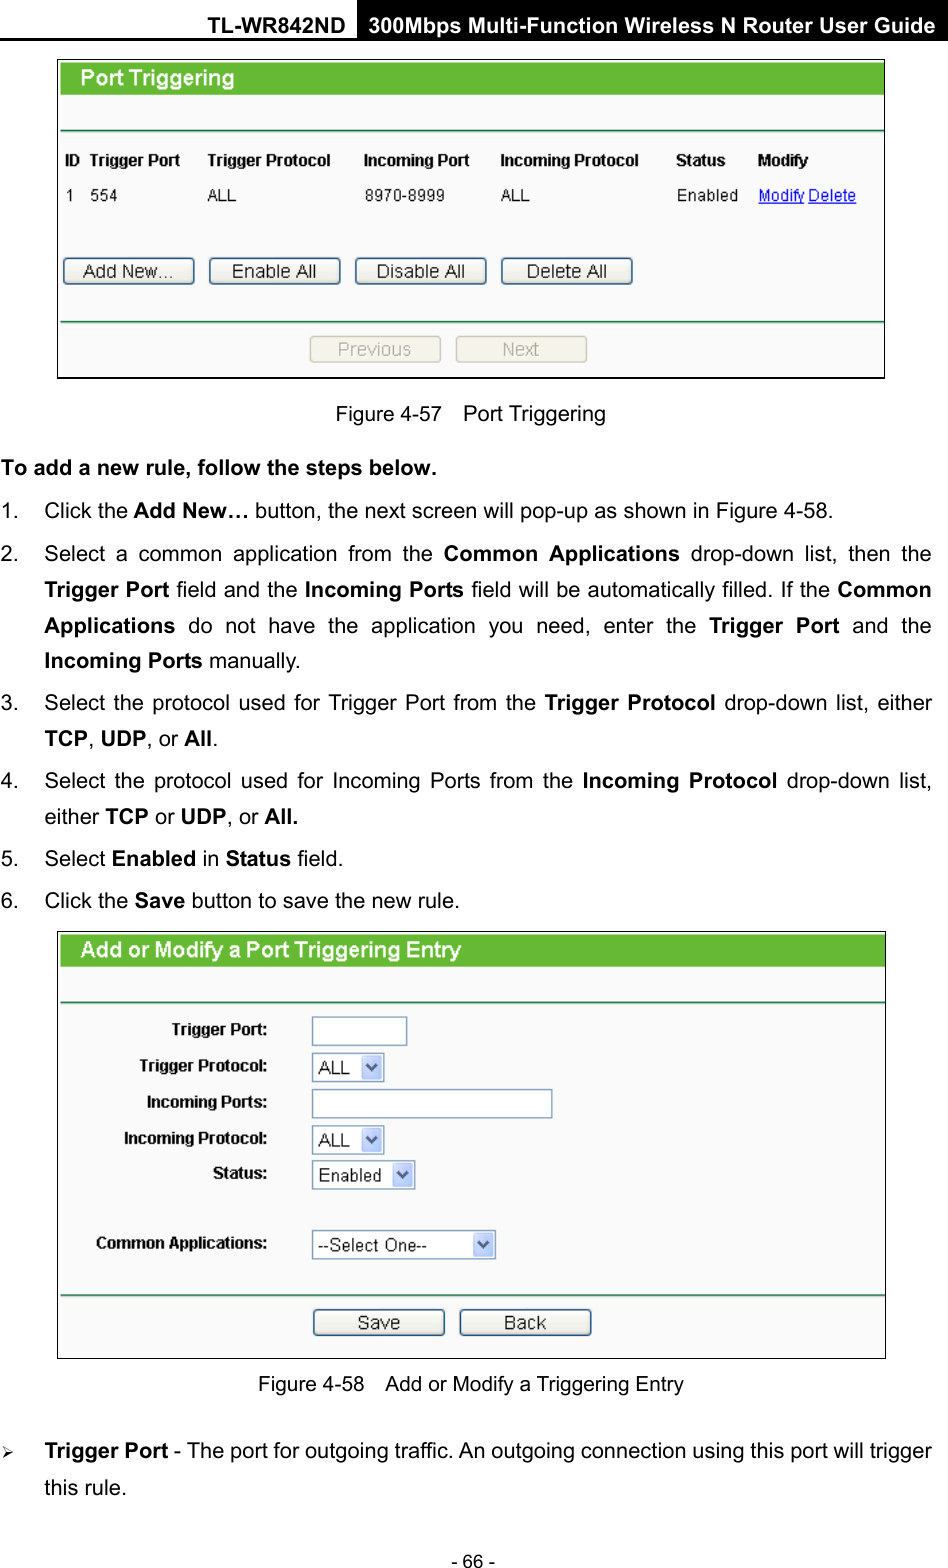 TL-WR842ND 300Mbps Multi-Function Wireless N Router User Guide  - 66 -  Figure 4-57  Port Triggering To add a new rule, follow the steps below.   1. Click the Add New… button, the next screen will pop-up as shown in Figure 4-58. 2. Select a common application from the Common Applications drop-down list, then the Trigger Port field and the Incoming Ports field will be automatically filled. If the Common Applications  do not have the application you need, enter the Trigger Port and the Incoming Ports manually. 3. Select the protocol used for Trigger Port from the Trigger Protocol drop-down list, either TCP, UDP, or All. 4. Select the protocol used for Incoming Ports from the Incoming Protocol drop-down list, either TCP or UDP, or All. 5. Select Enabled in Status field.   6. Click the Save button to save the new rule.  Figure 4-58  Add or Modify a Triggering Entry  Trigger Port - The port for outgoing traffic. An outgoing connection using this port will trigger this rule.   